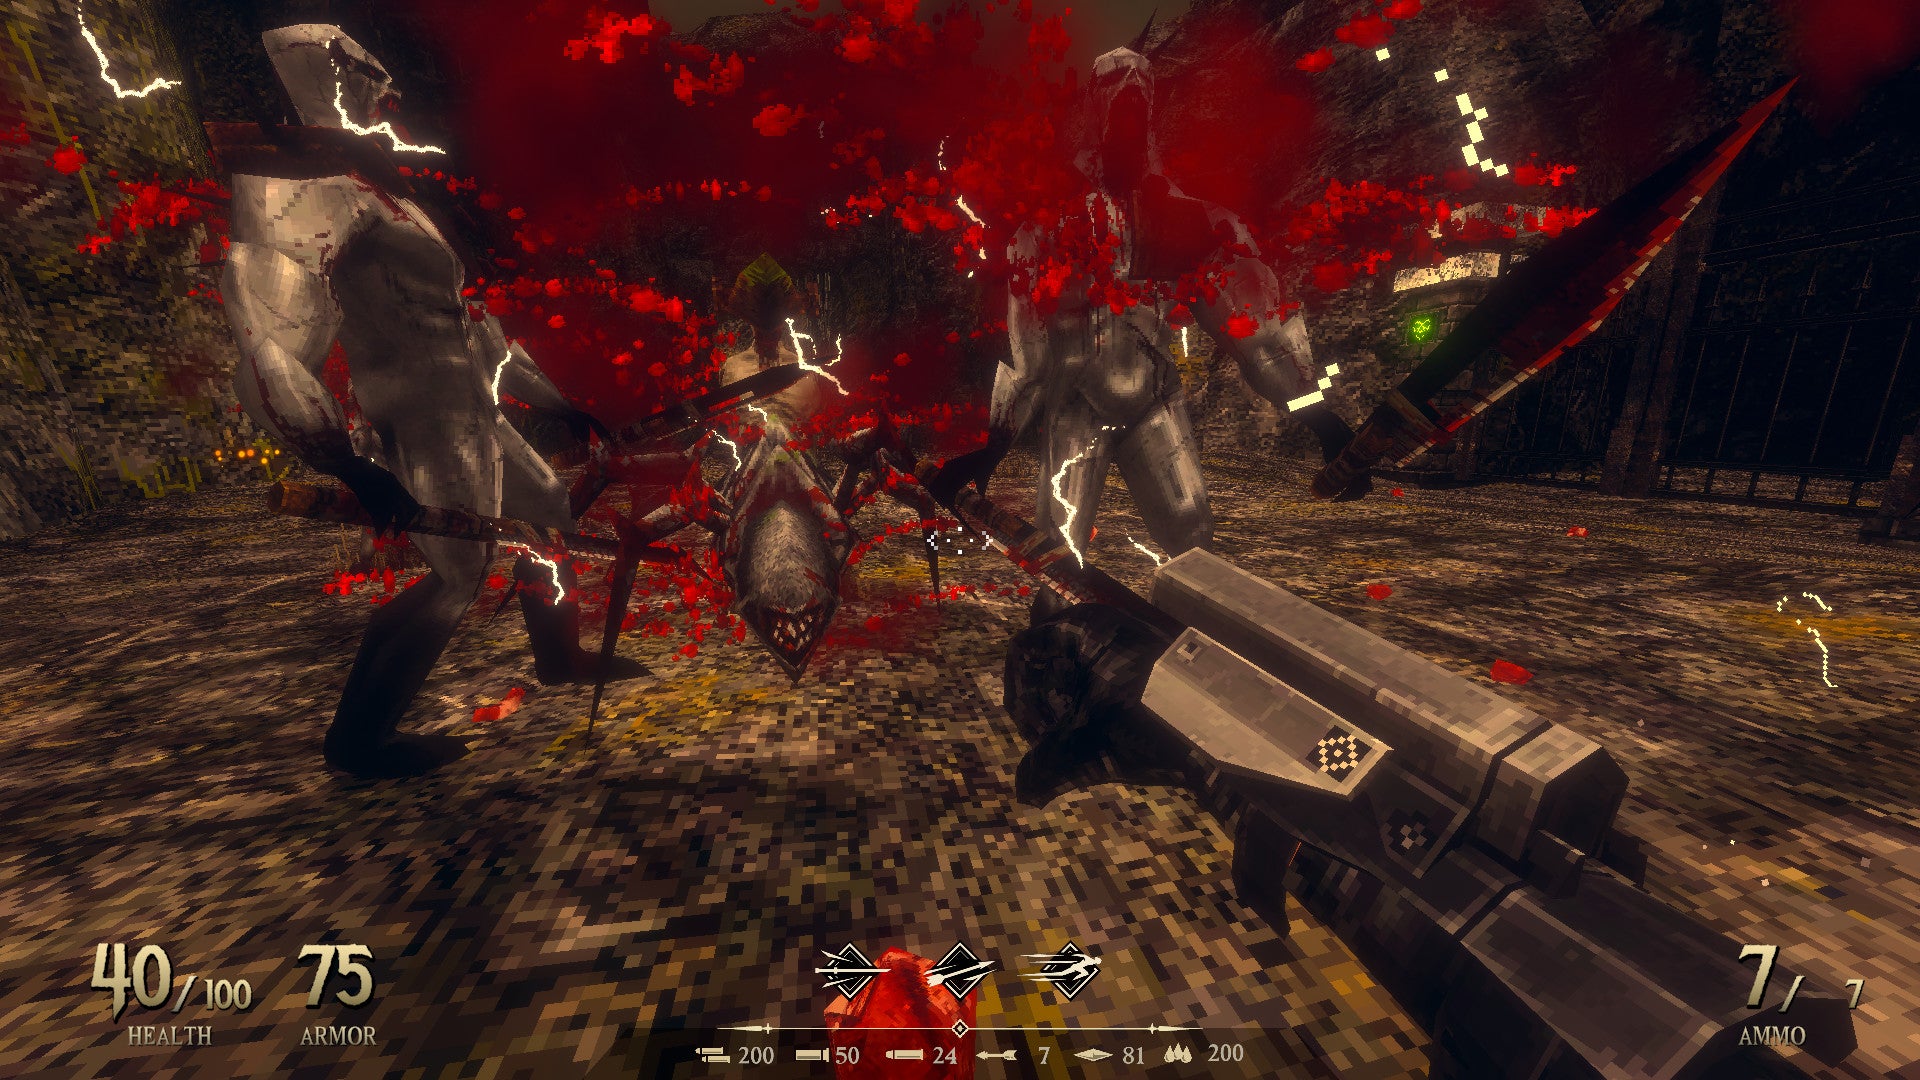 A screenshot of Dread Templar, a Quake-like FPS showing some zombies and a demon spider spraying blood while being shot by the player.